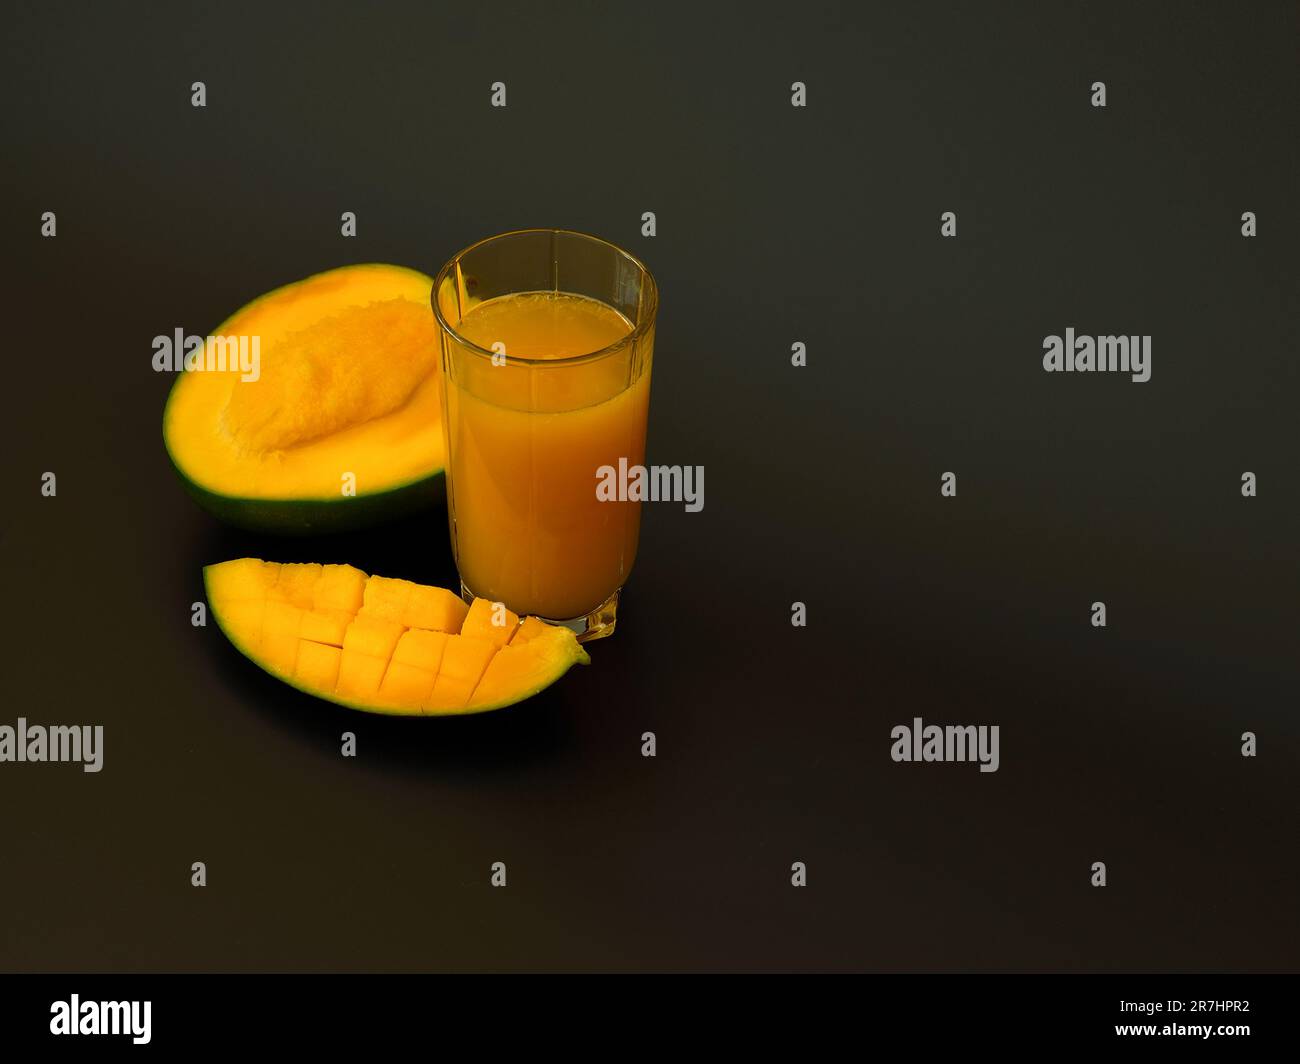 https://c8.alamy.com/comp/2R7HPR2/mango-juice-in-a-tall-glass-on-a-black-background-next-to-pieces-of-ripe-exotic-fruit-close-up-2R7HPR2.jpg